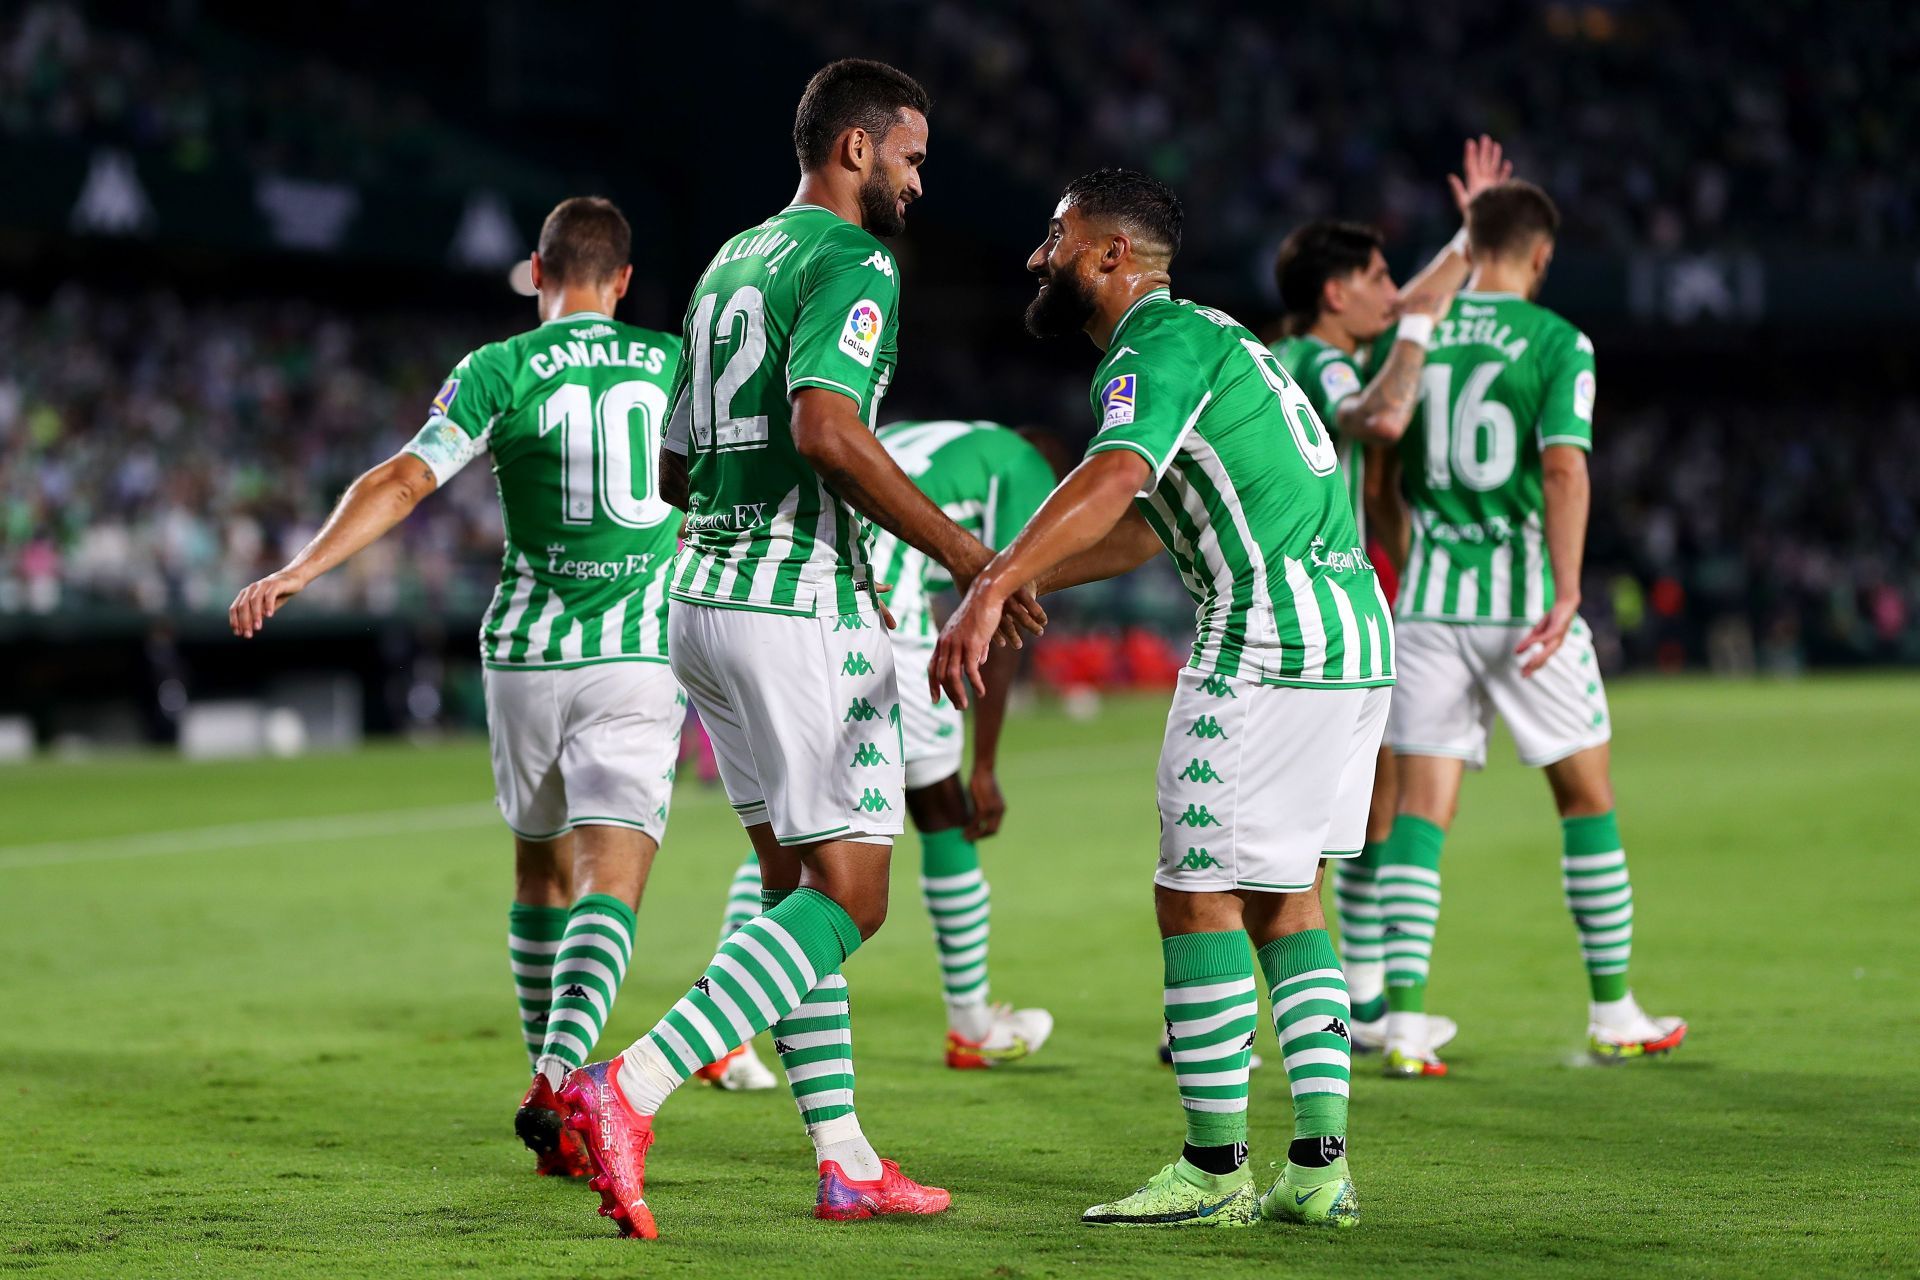 Real Betis take on Rayo Vallecano this weekend